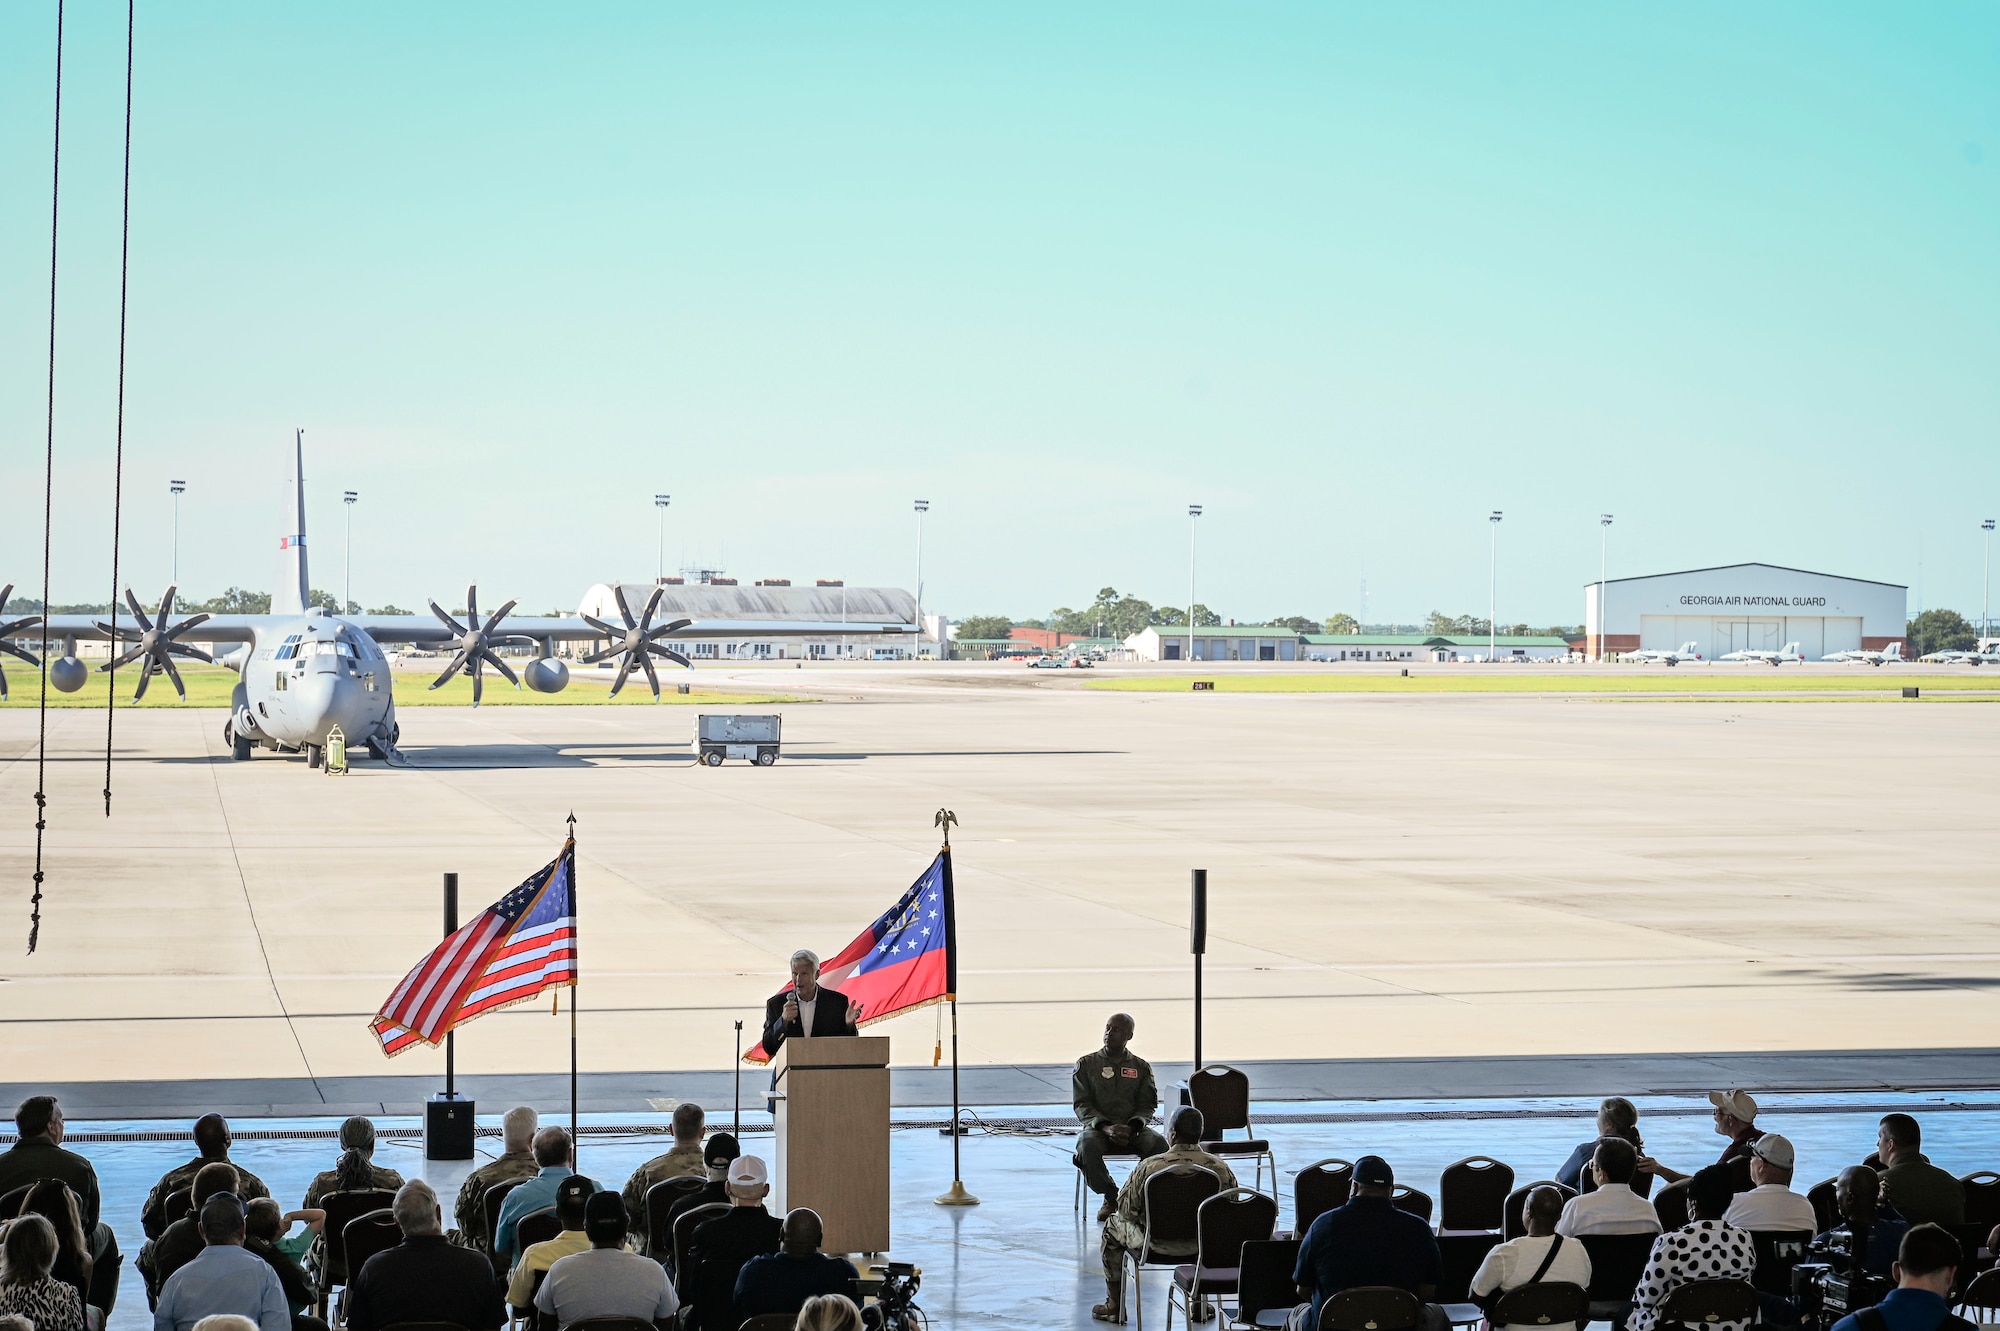 Retired U.S. Air Force Brig. Gen. Stephen Westgate, a former 165th Airlift Wing commander, gives the keynote speech during the send-off ceremony held in honor of the final C-130 Hercules aircraft leaving Savannah Air National Guard Base in Savannah, Georgia, August 18, 2023.